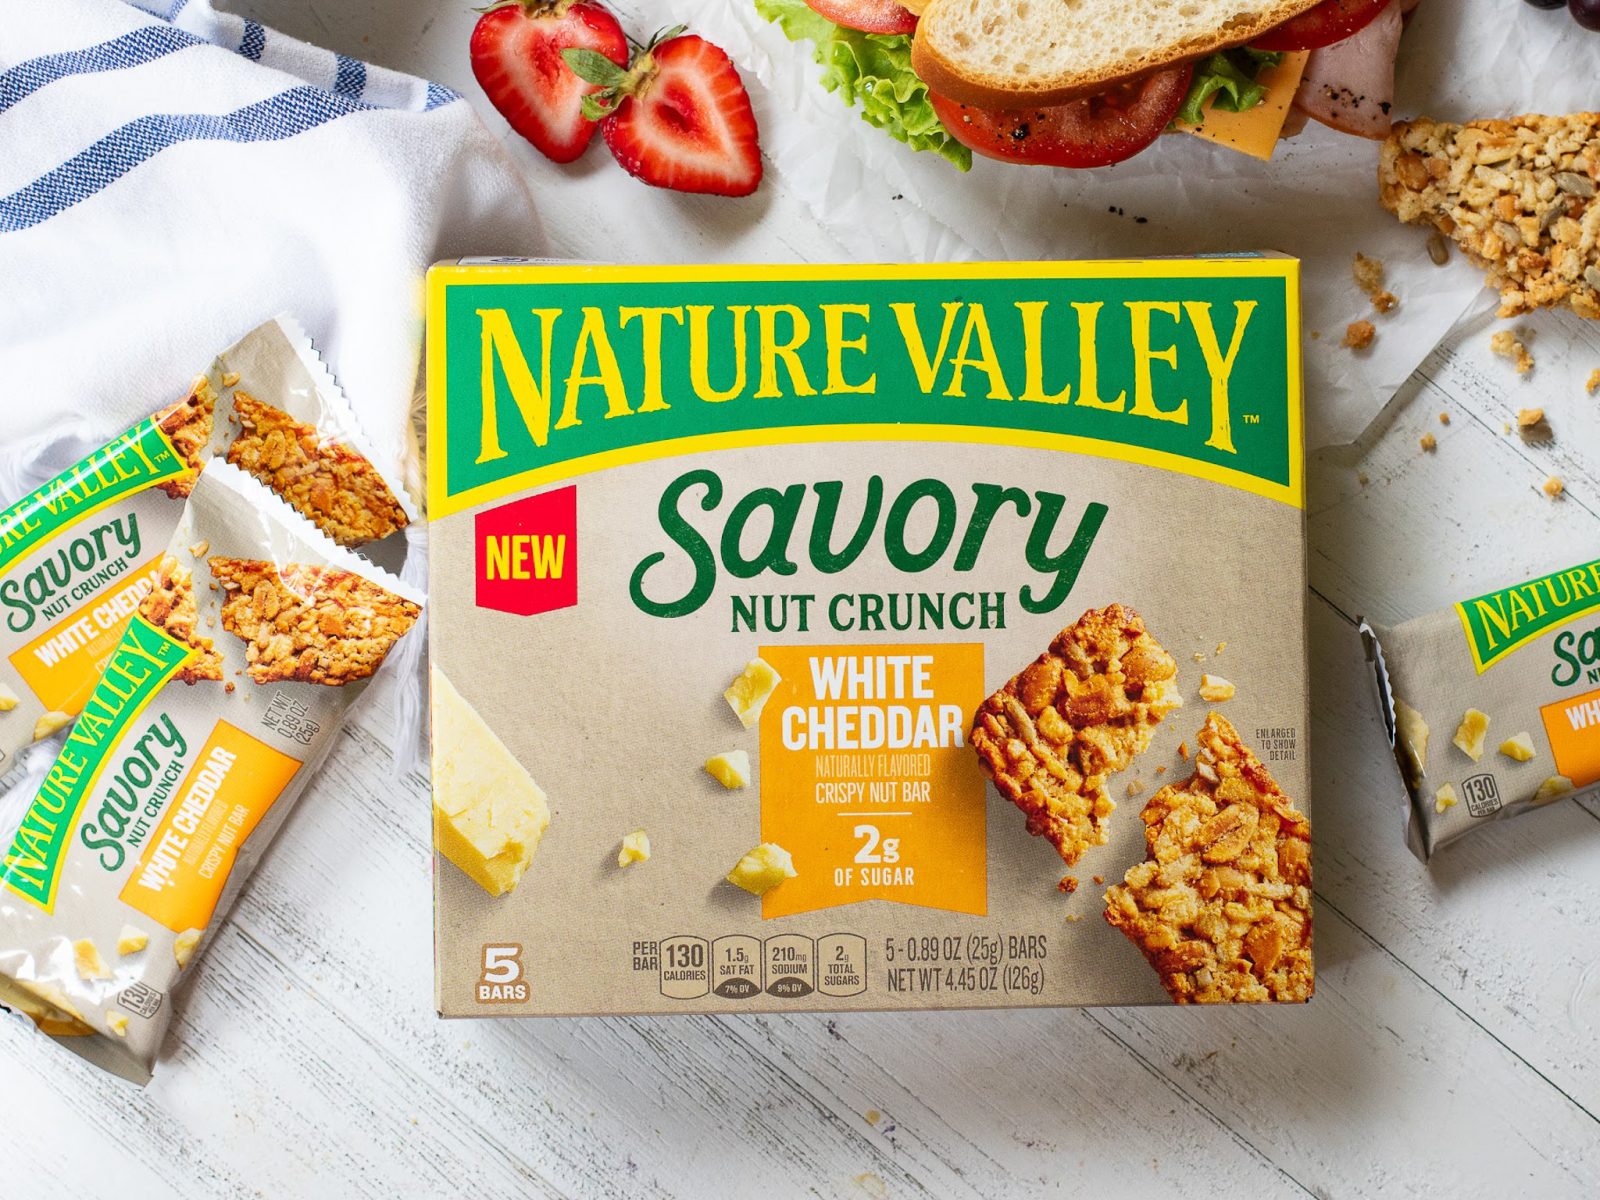 Get Nature Valley Savory Bars For As Low As 75¢ At Kroger